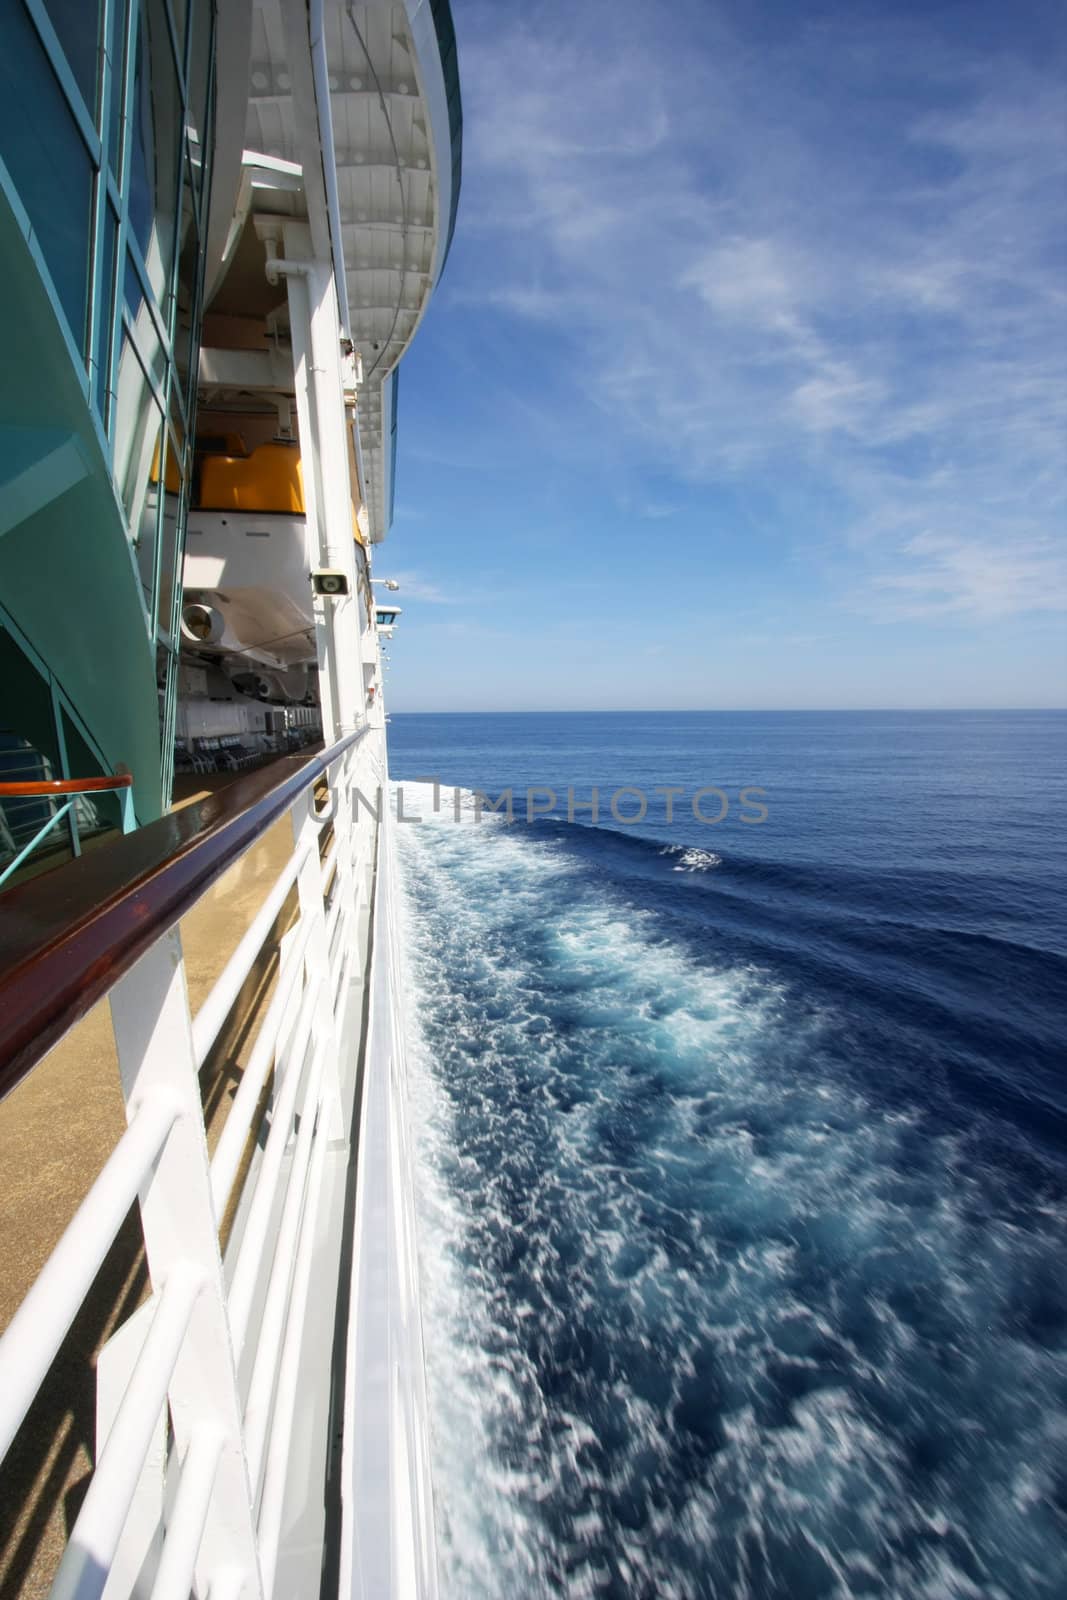 On The Cruise by Imagecom